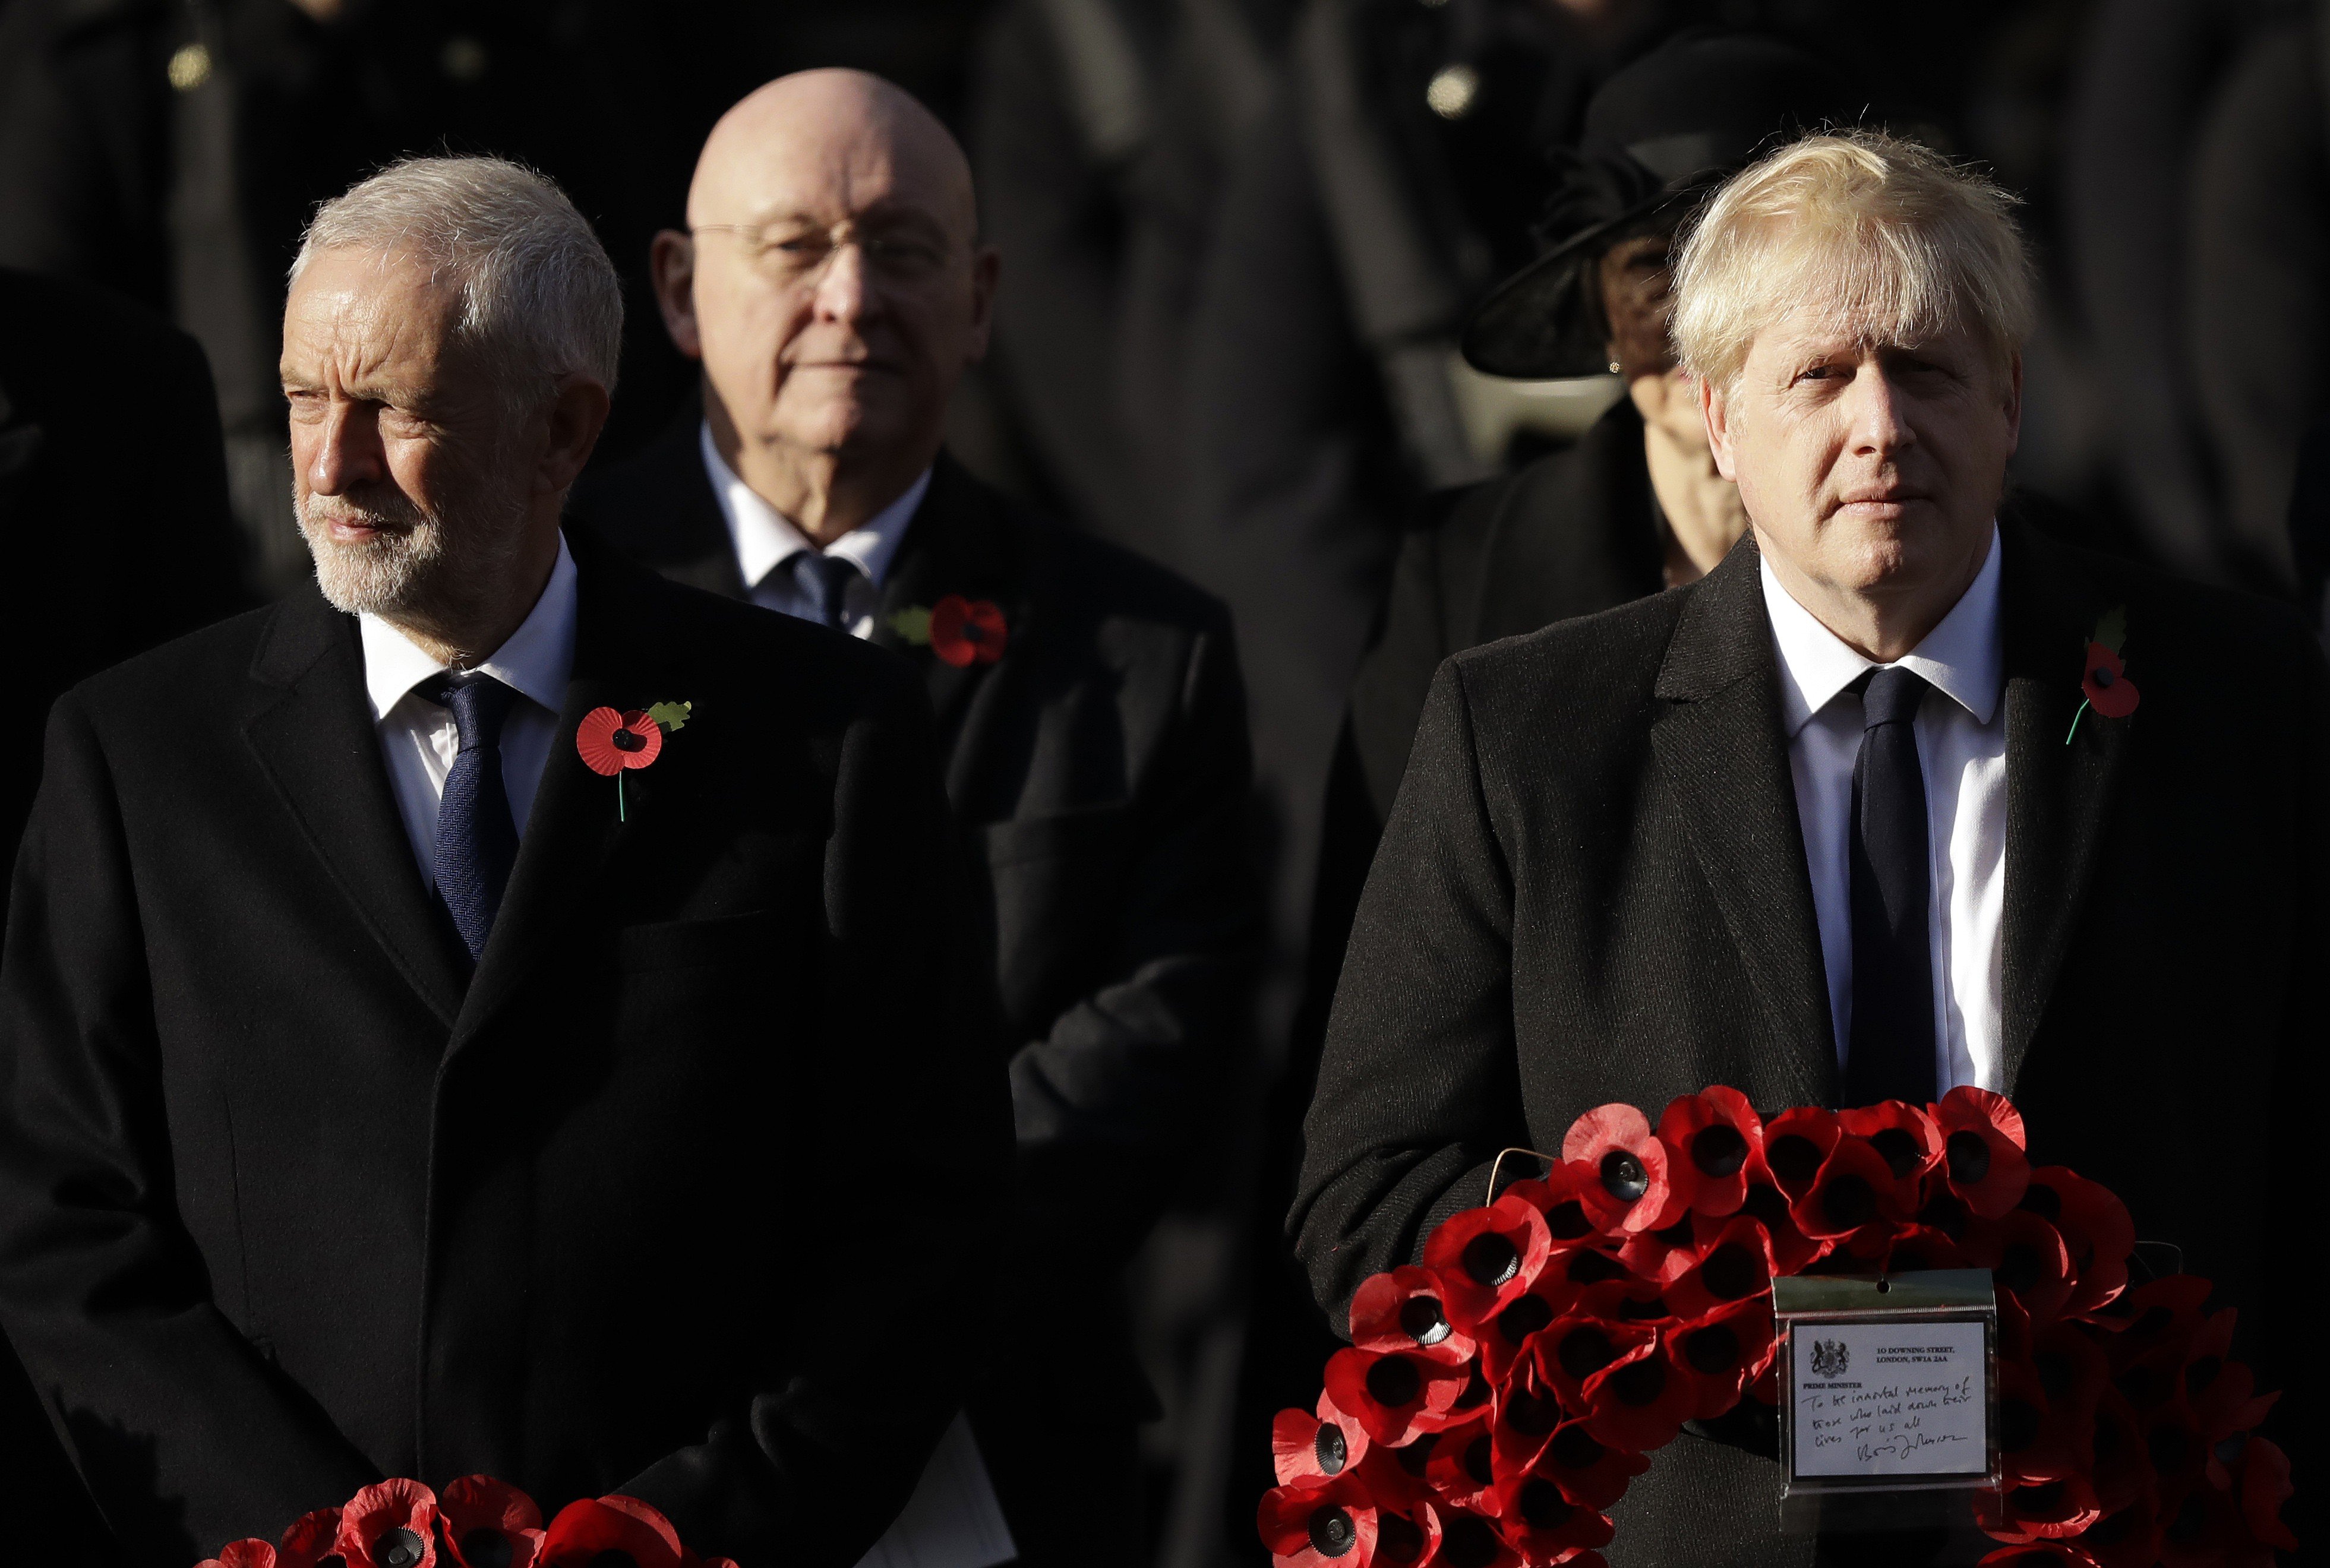 British Prime Minister Boris Johnson (right) and leader of the Labour Party Jeremy Corbyn prepare to lay wreaths during the Remembrance Sunday ceremony at the Cenotaph in Whitehall in London on November 10. Photo: AP